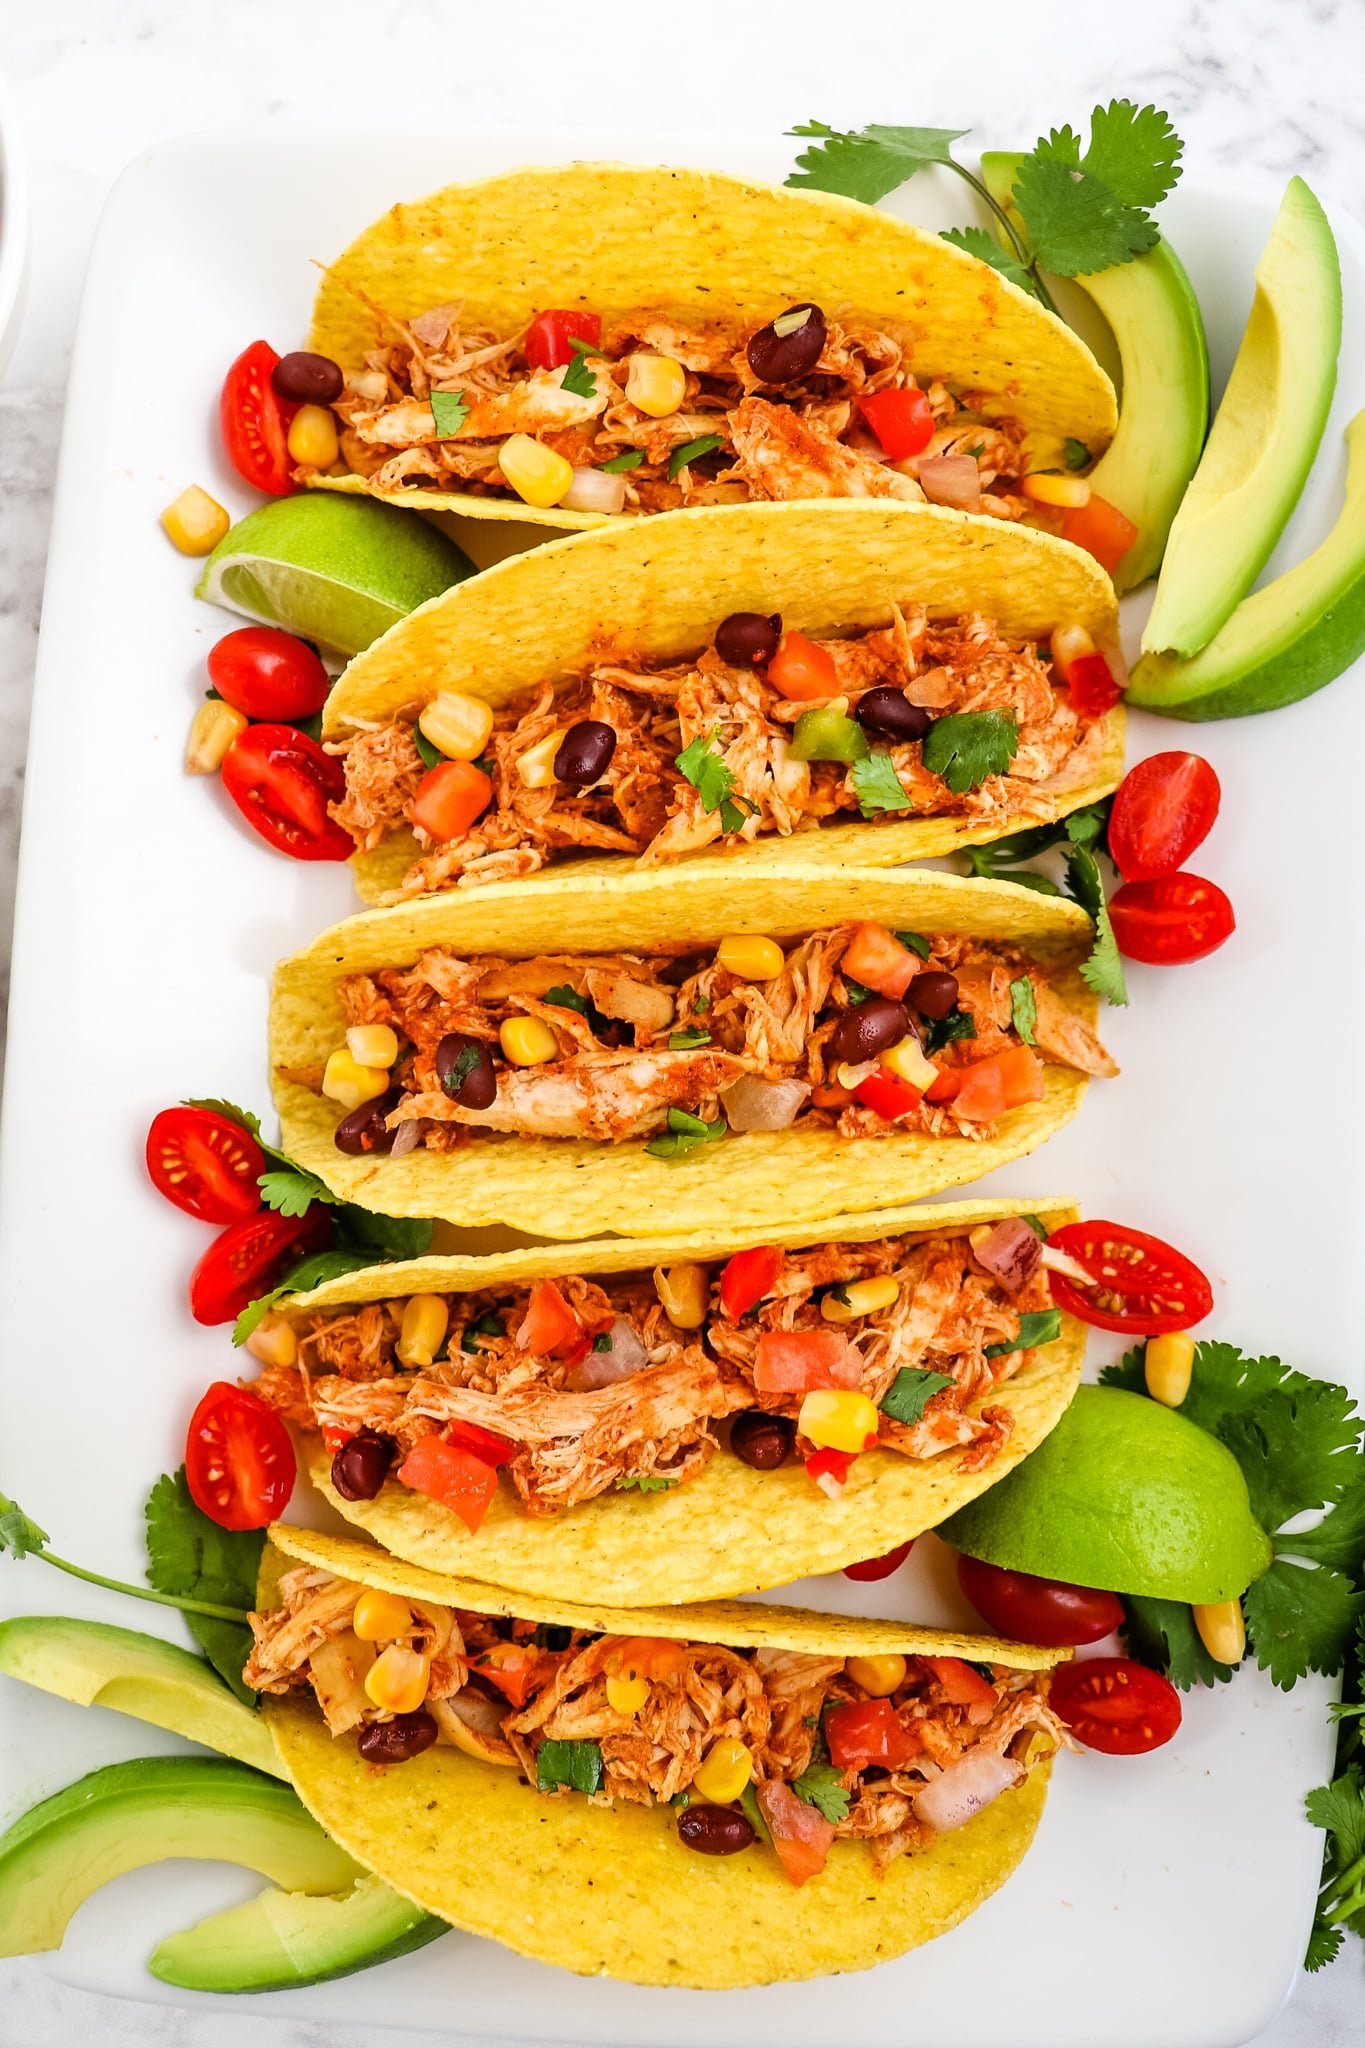 Rotisserie chicken tacos with avocado slices, cherry tomatoes and limes.